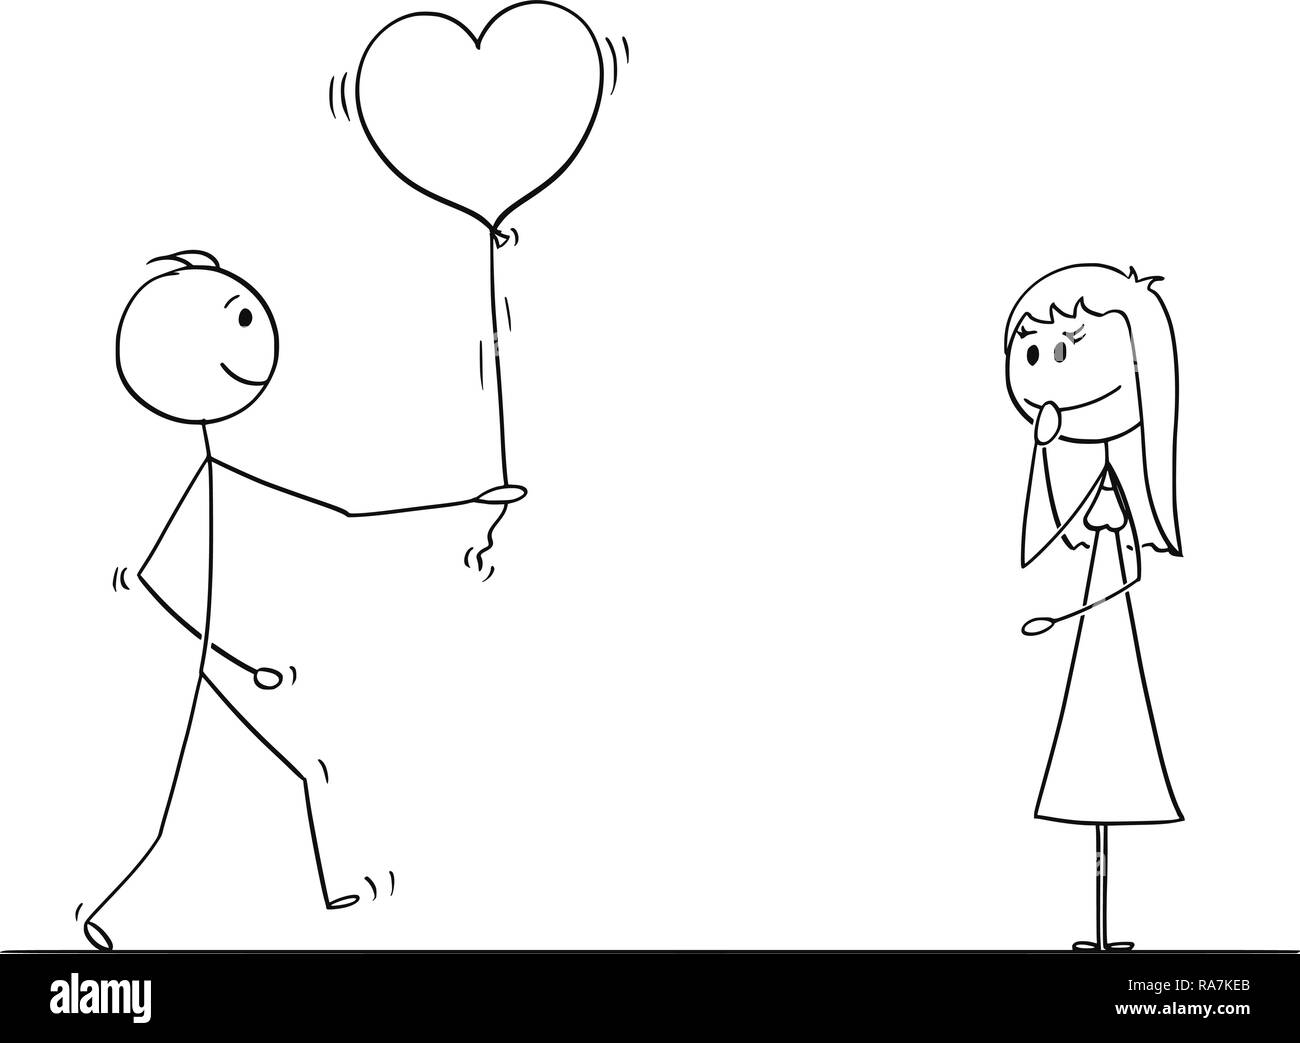 Stick Character Cartoon of Loving Man or Boy Giving Balloon Heart to Woman or Girl on Date Stock Vector